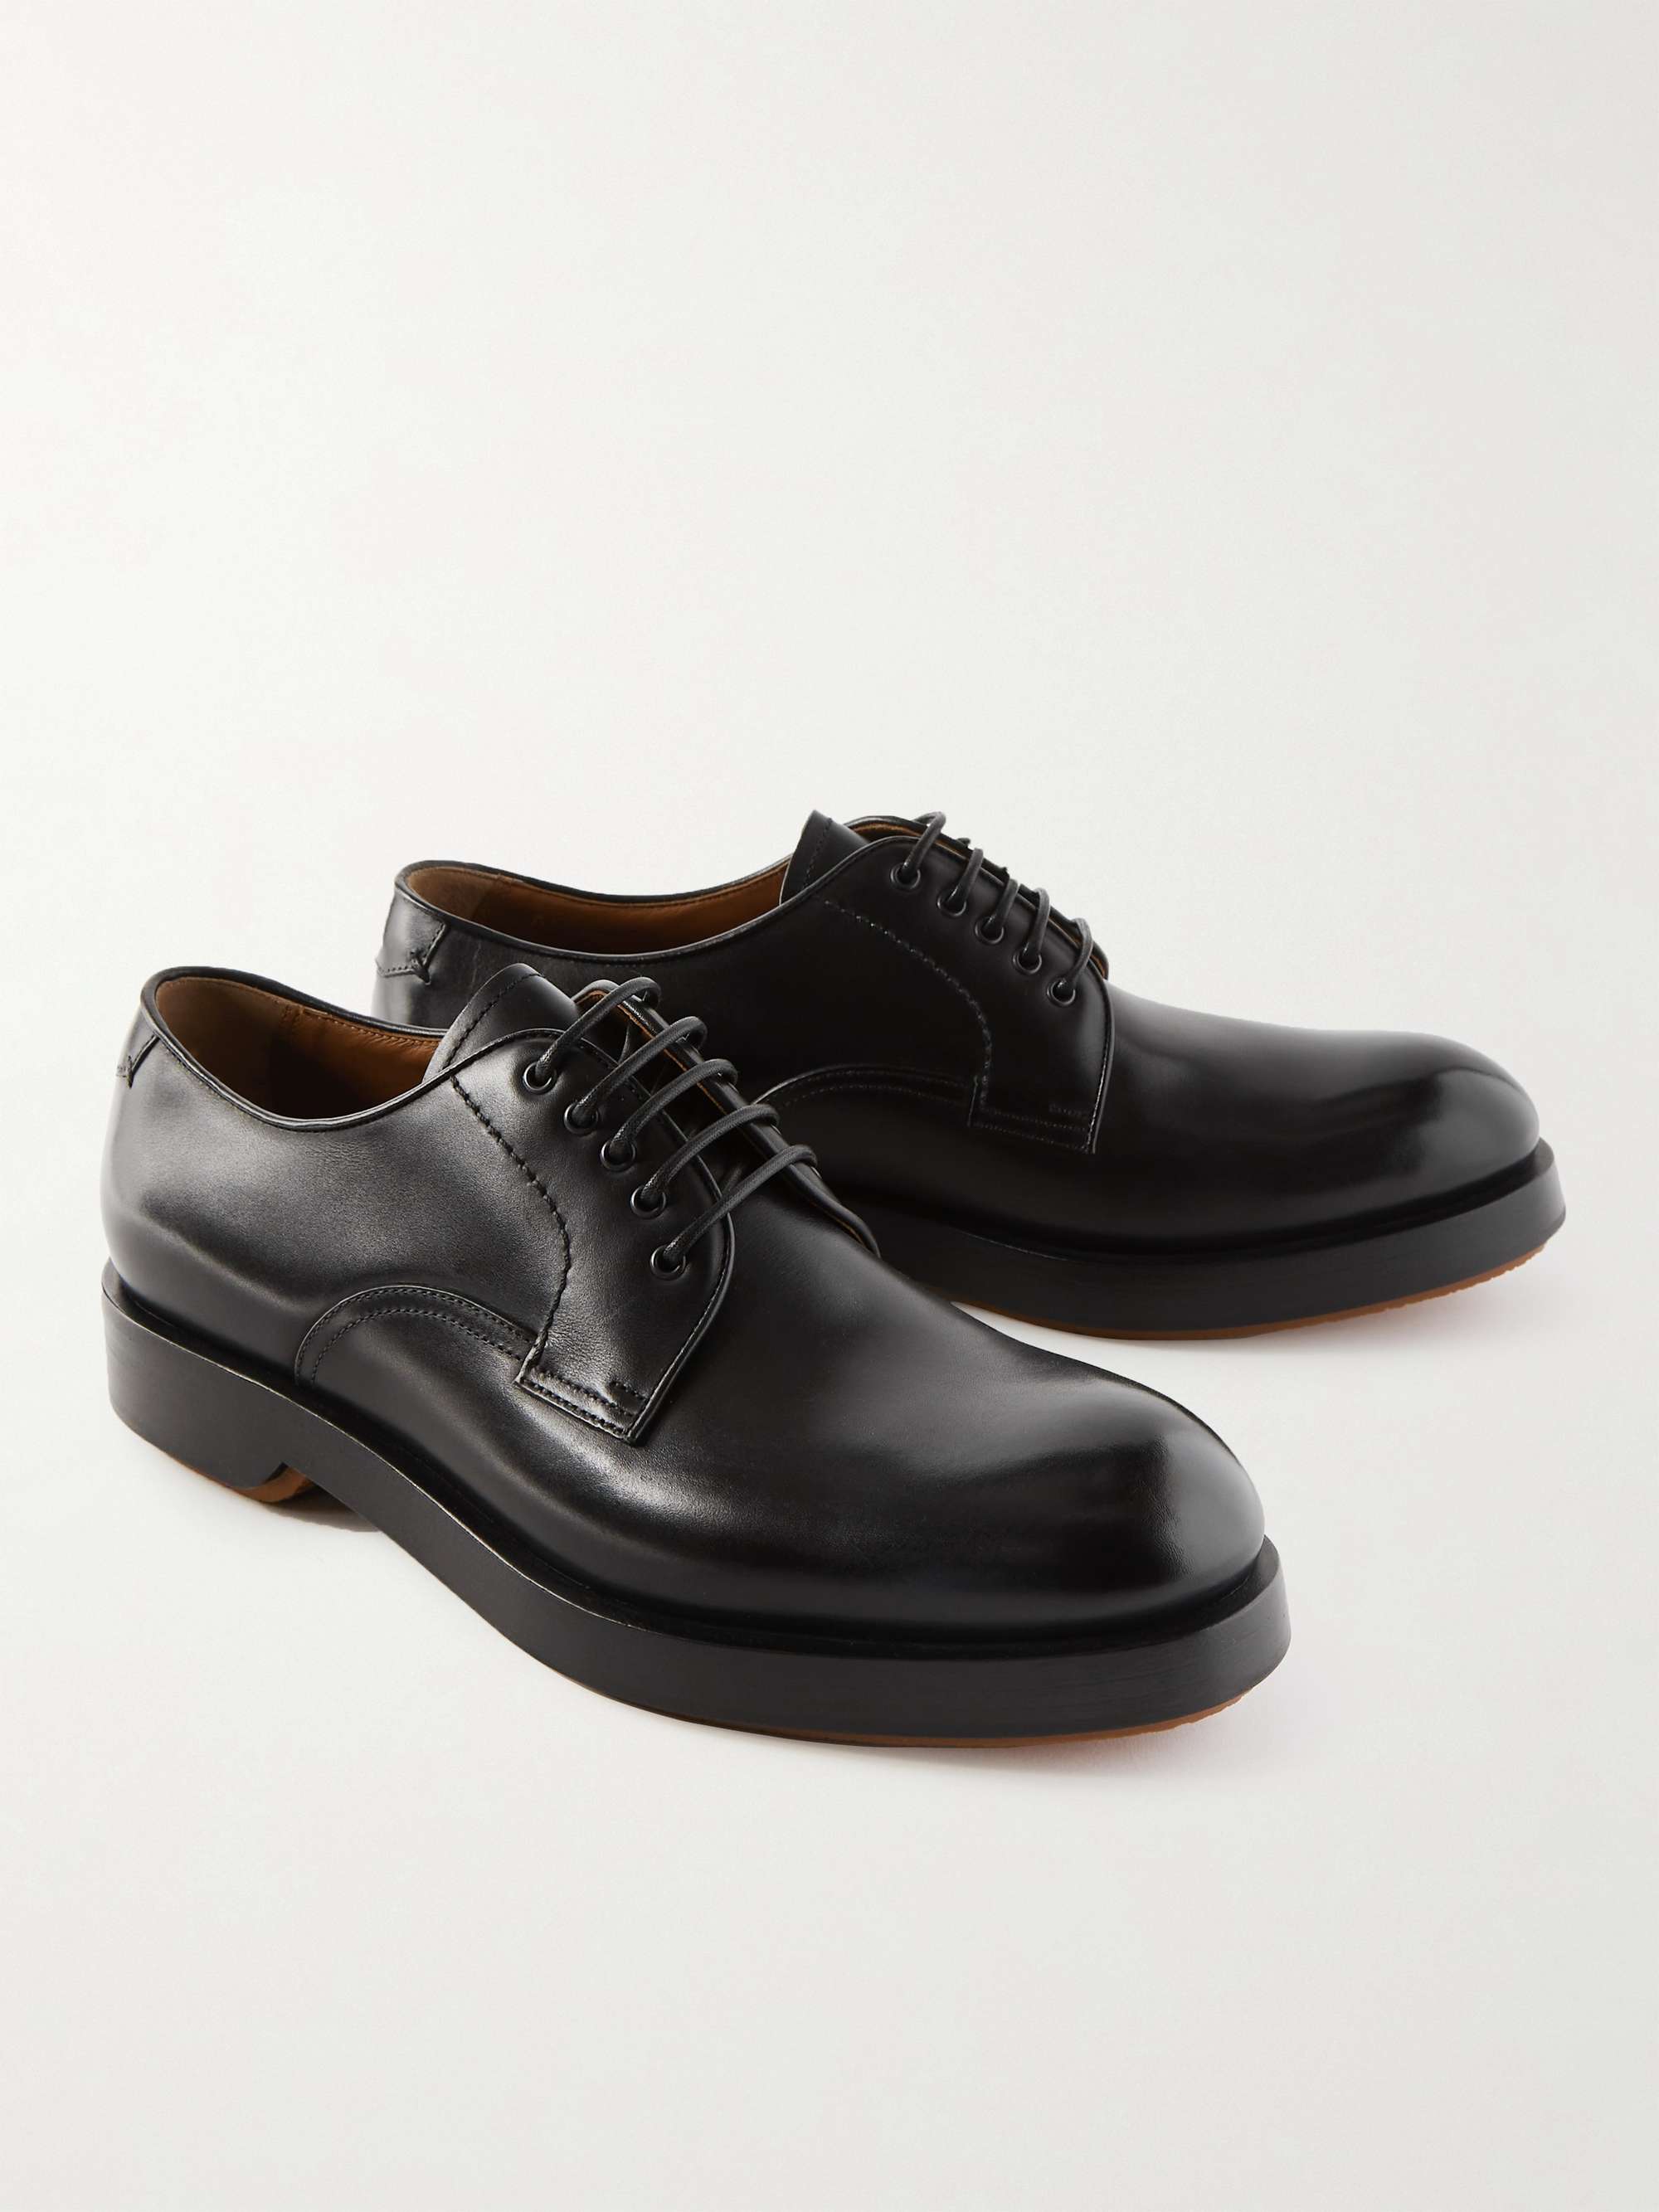 ZEGNA Udine Leather Derby Shoes